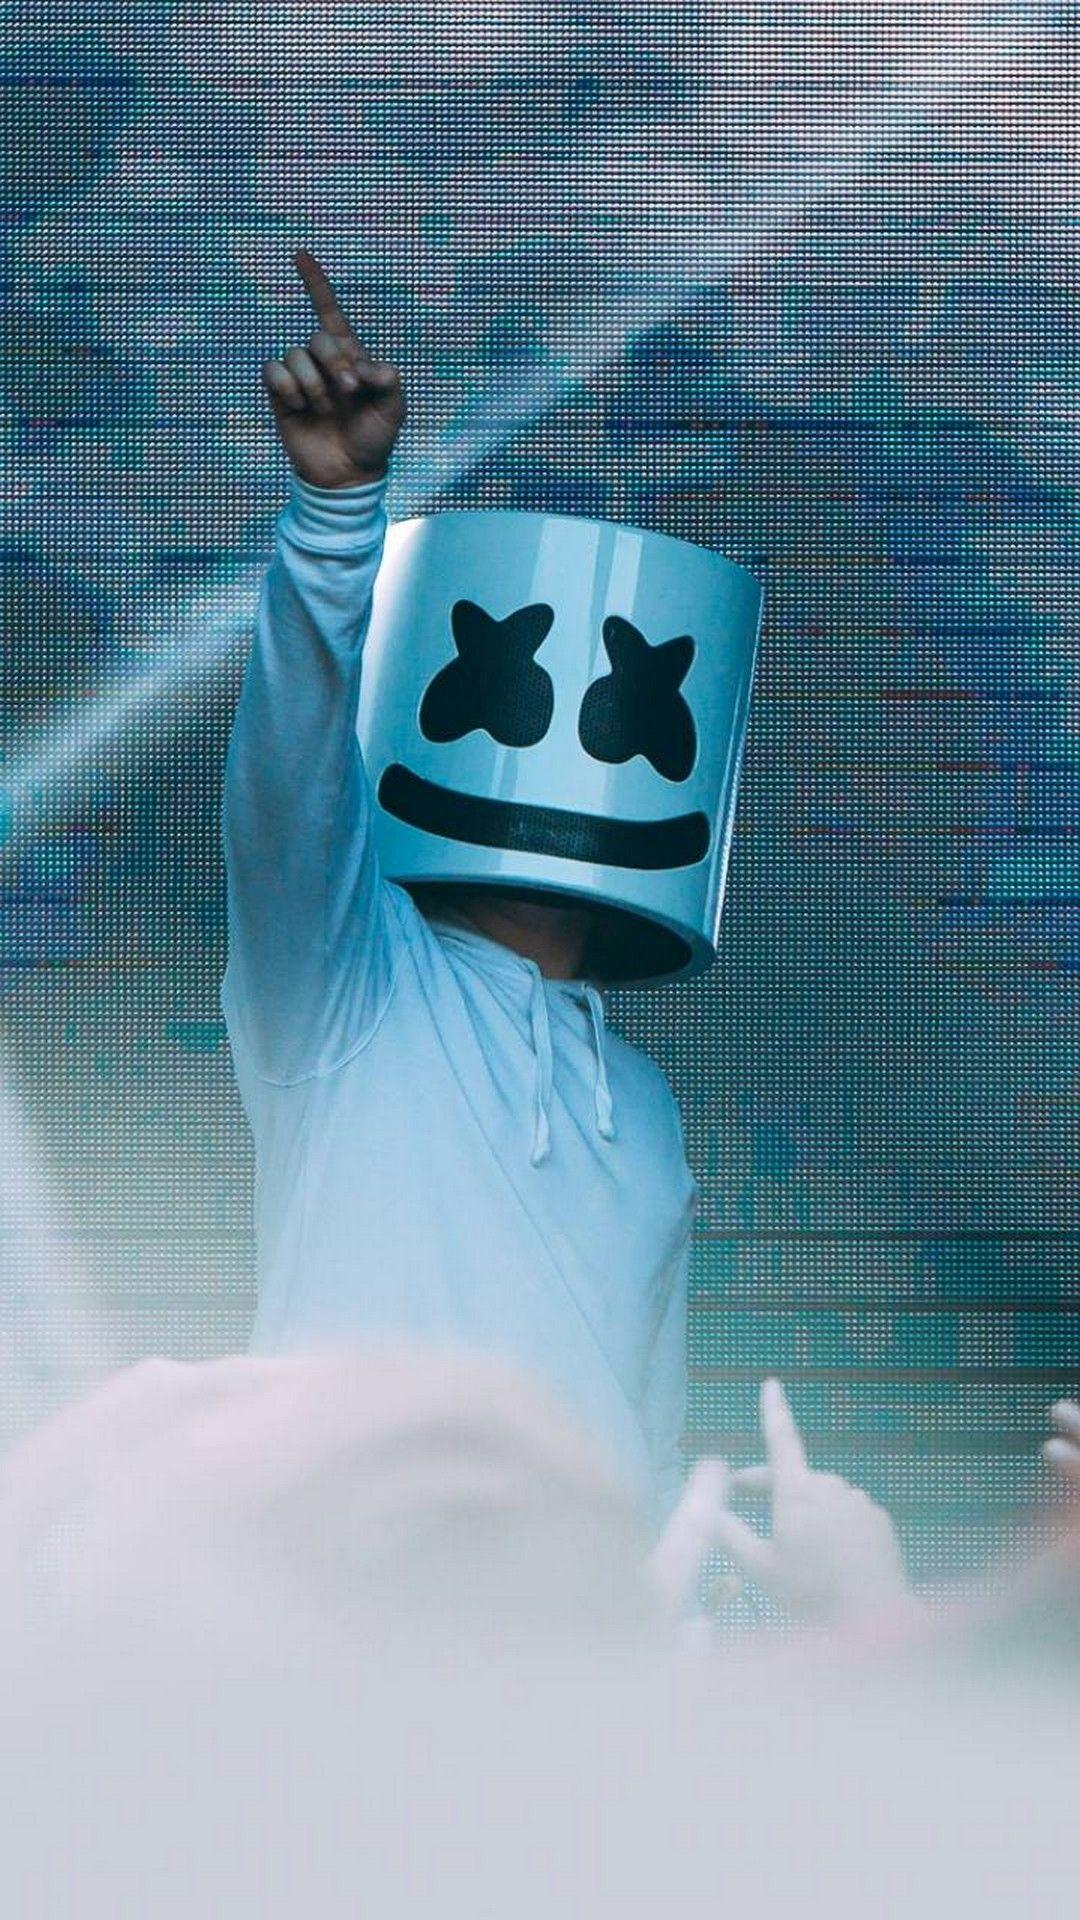 Marshmello Wallpaper for iPhone iPhone Wallpaper. iPhone